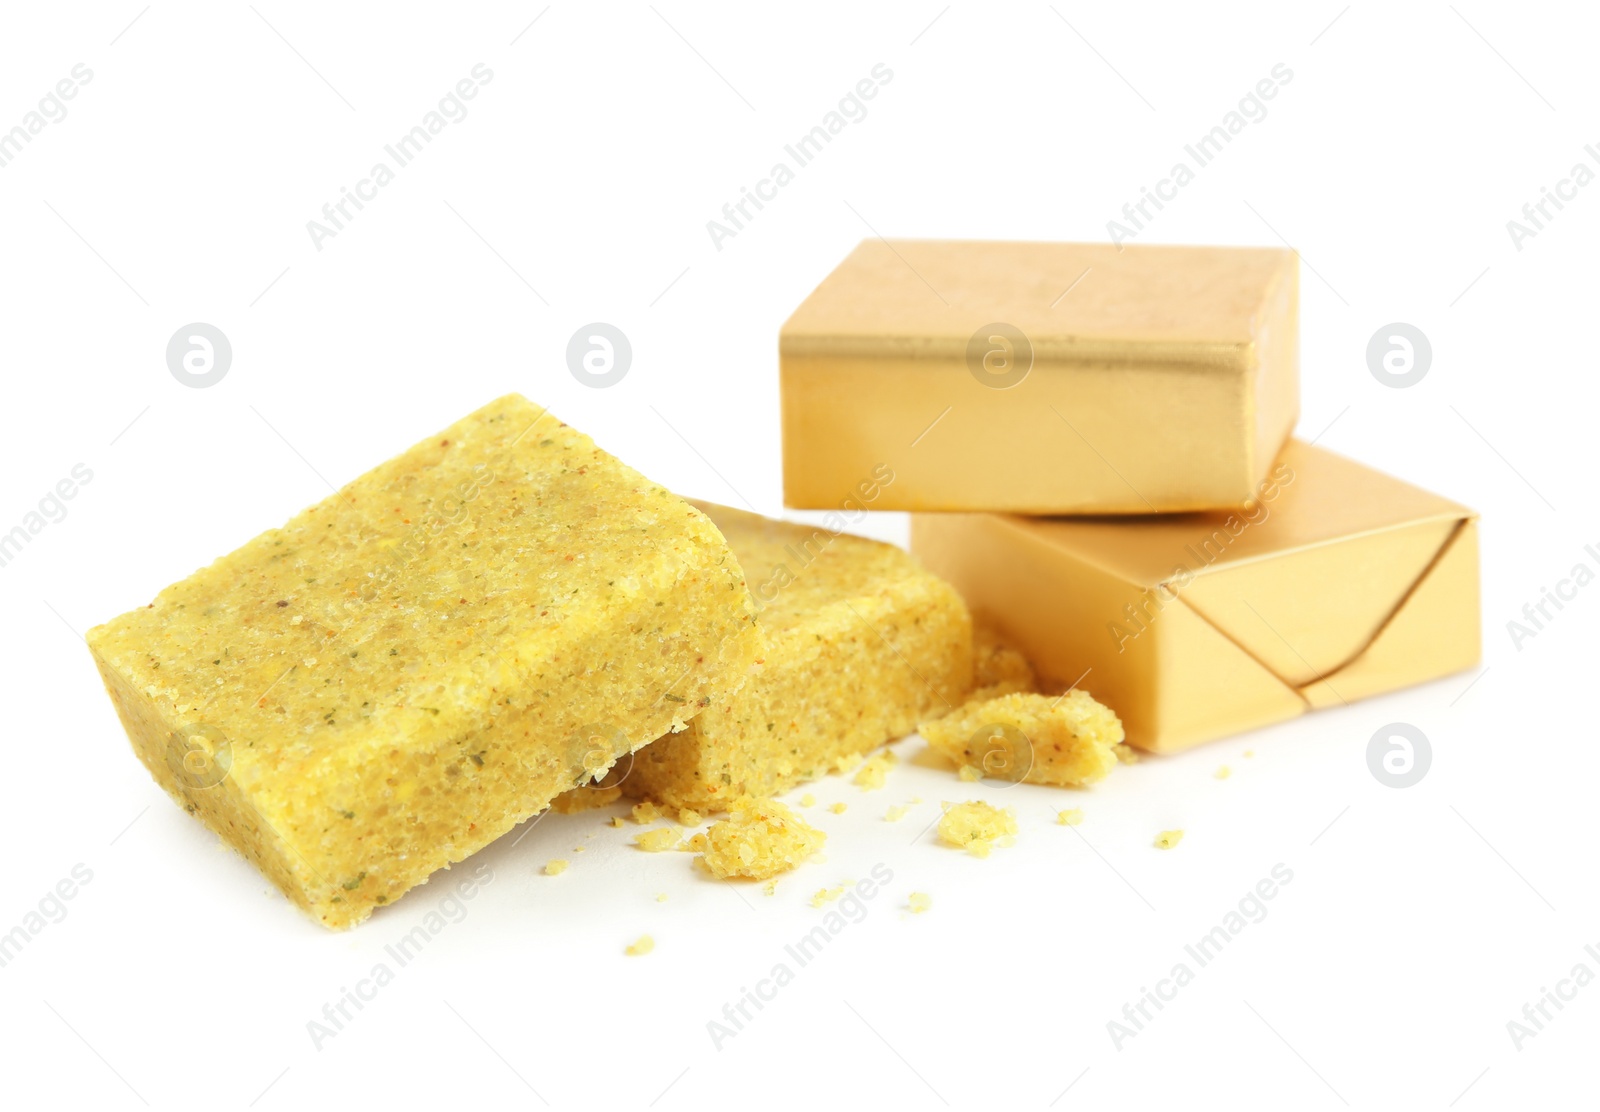 Photo of Bouillon cubes on white background. Broth concentrate